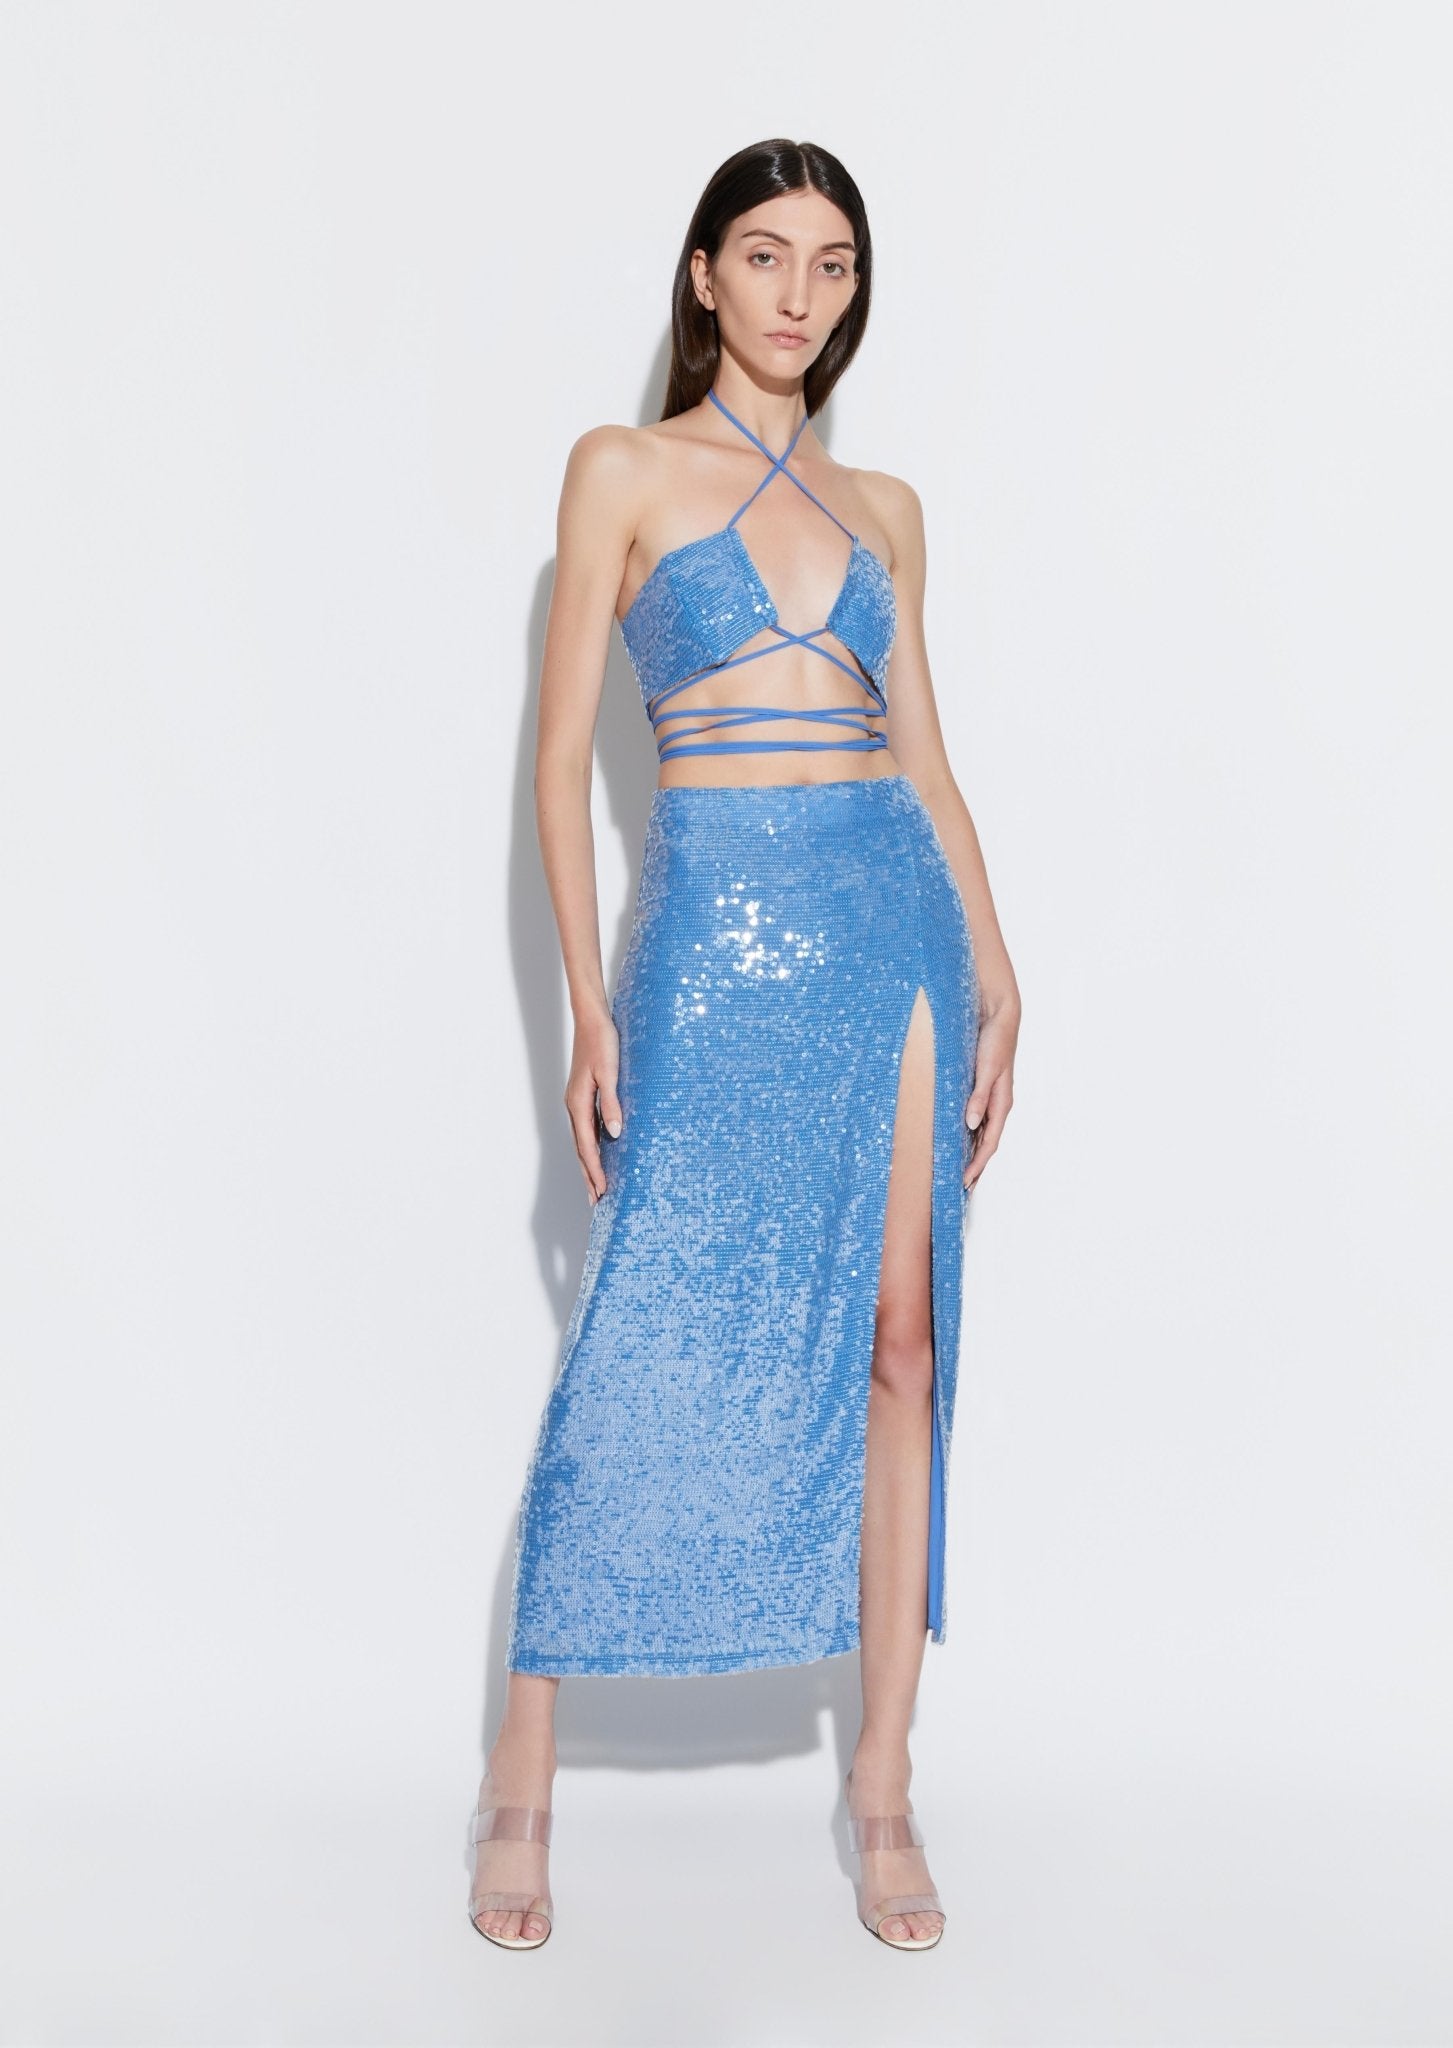 Sequin Skirt With Slit - LAPOINTE